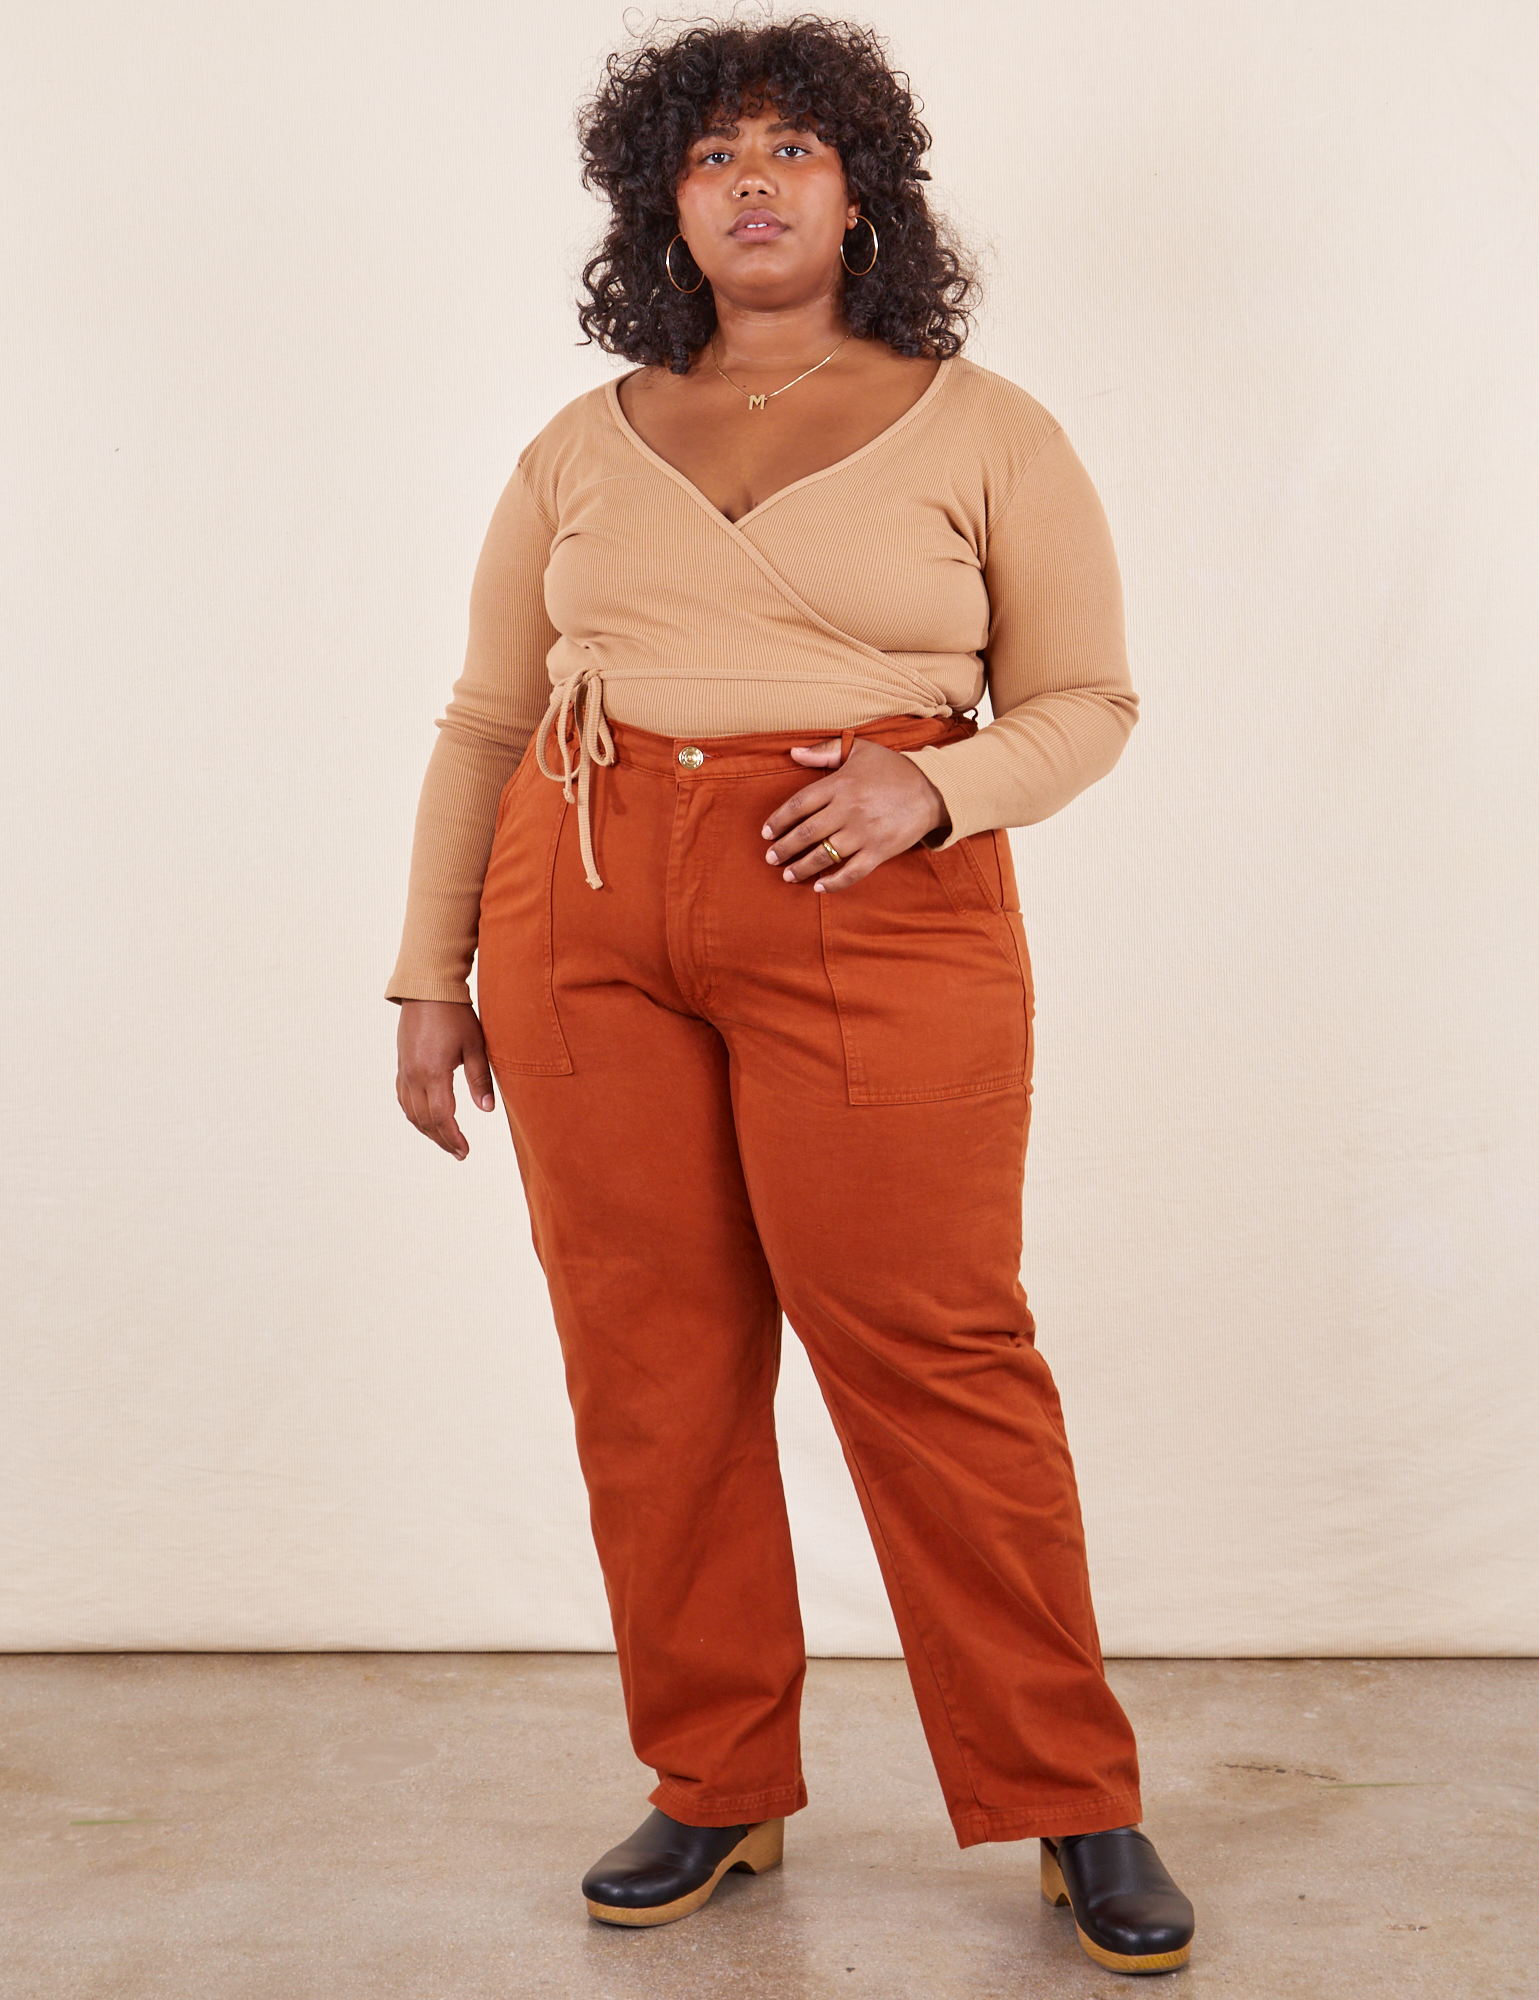 Morgan is 5&#39;5&quot; and wearing 3XL Work Pants in Burnt Terracotta paired with tan Wrap Top